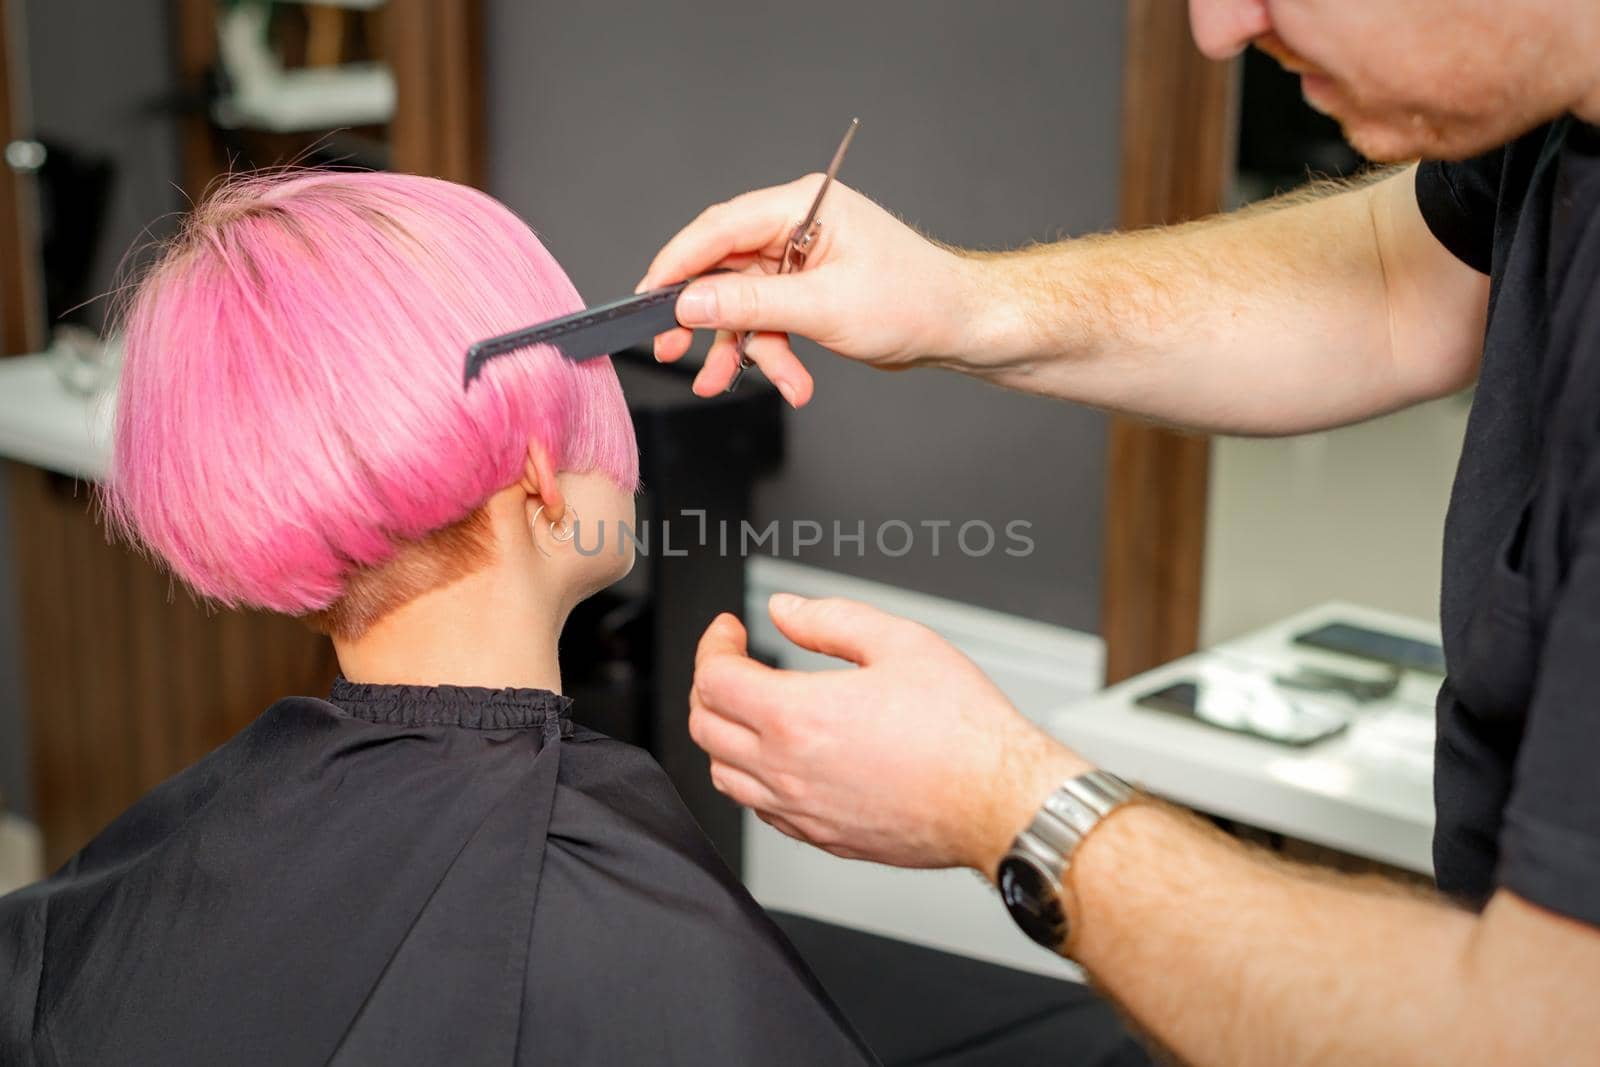 Hands of hairdresser combing hair making short pink hairstyle for a young caucasian woman in a beauty salon